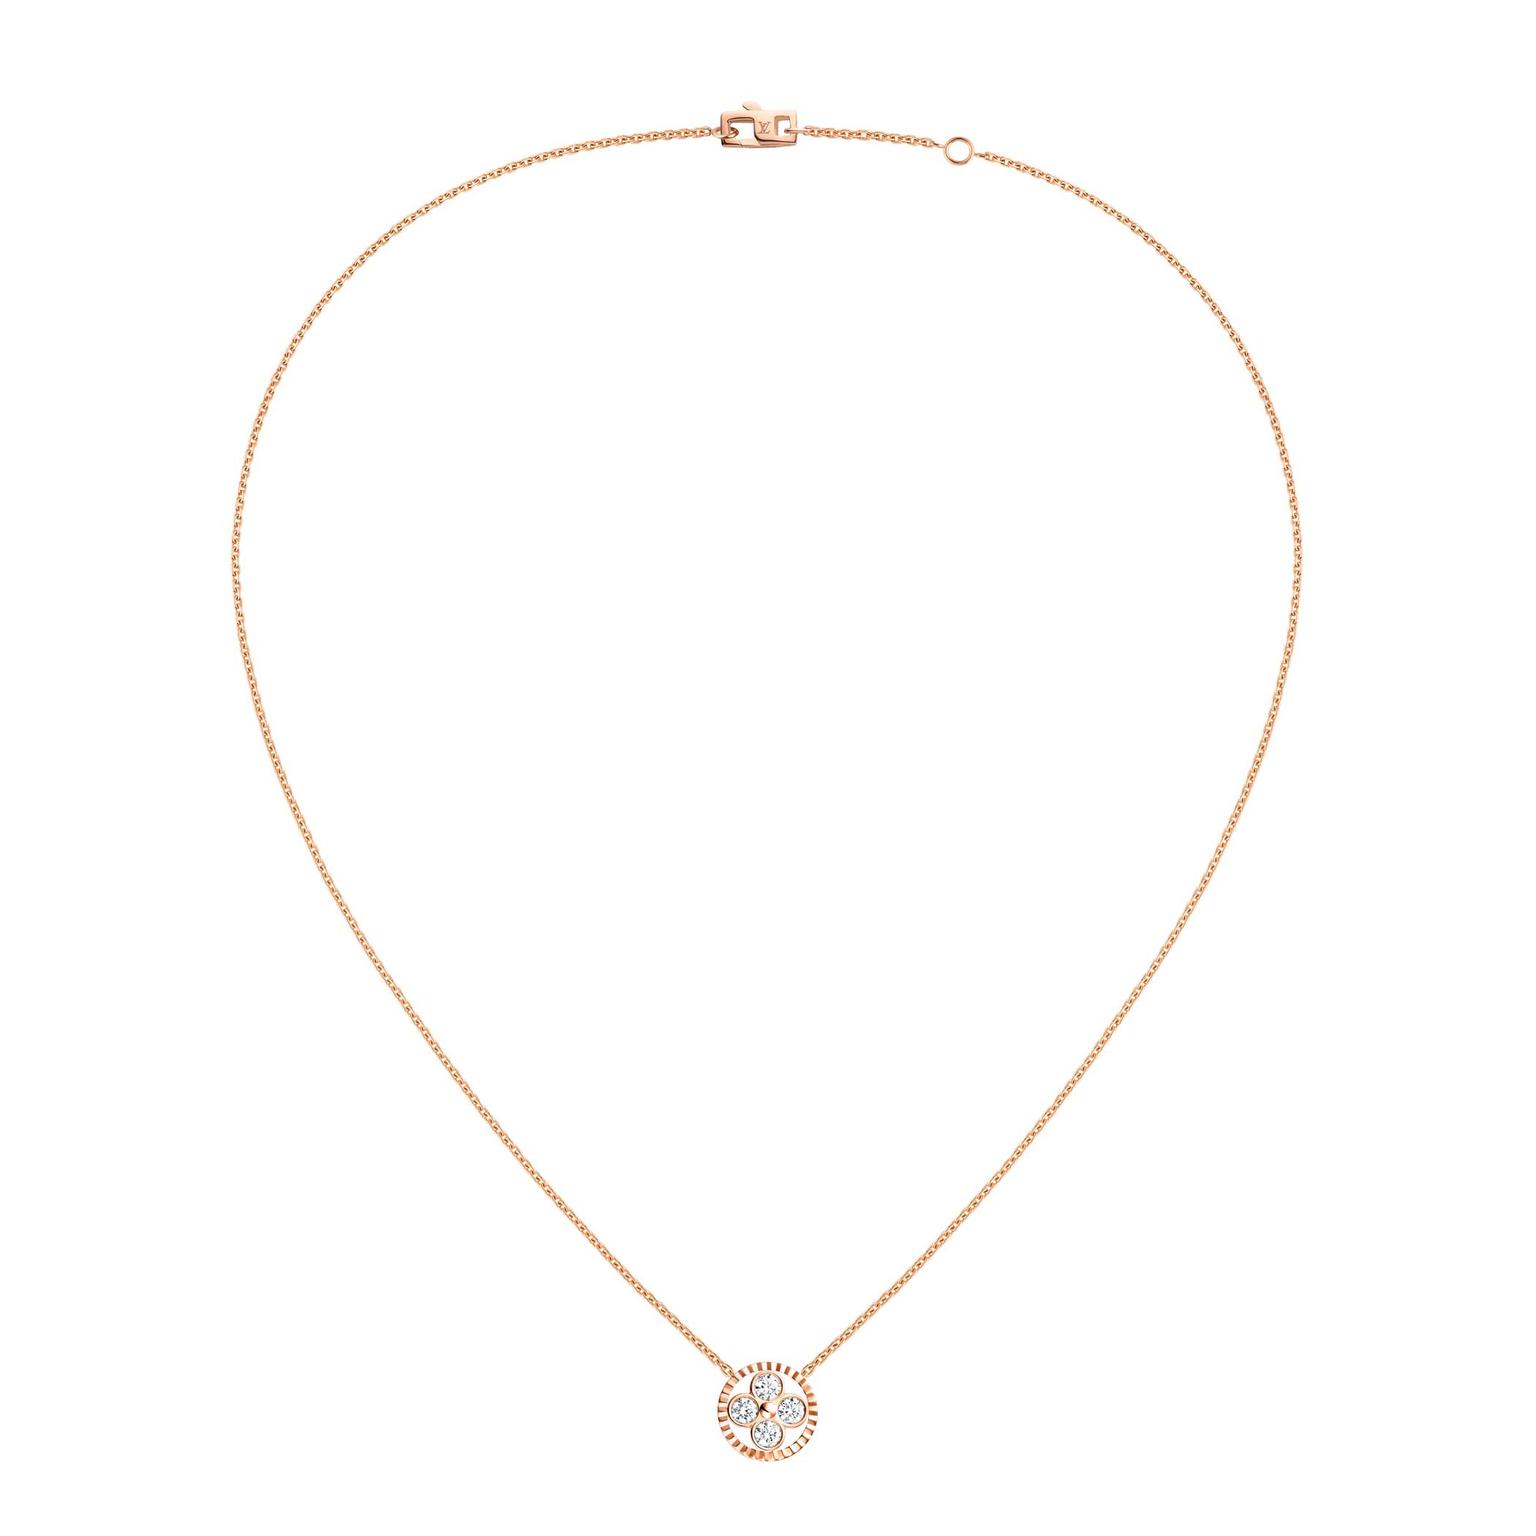 Louis Vuitton Monogram Sun and Stars collection Sun pendant necklace in rose gold_zoom